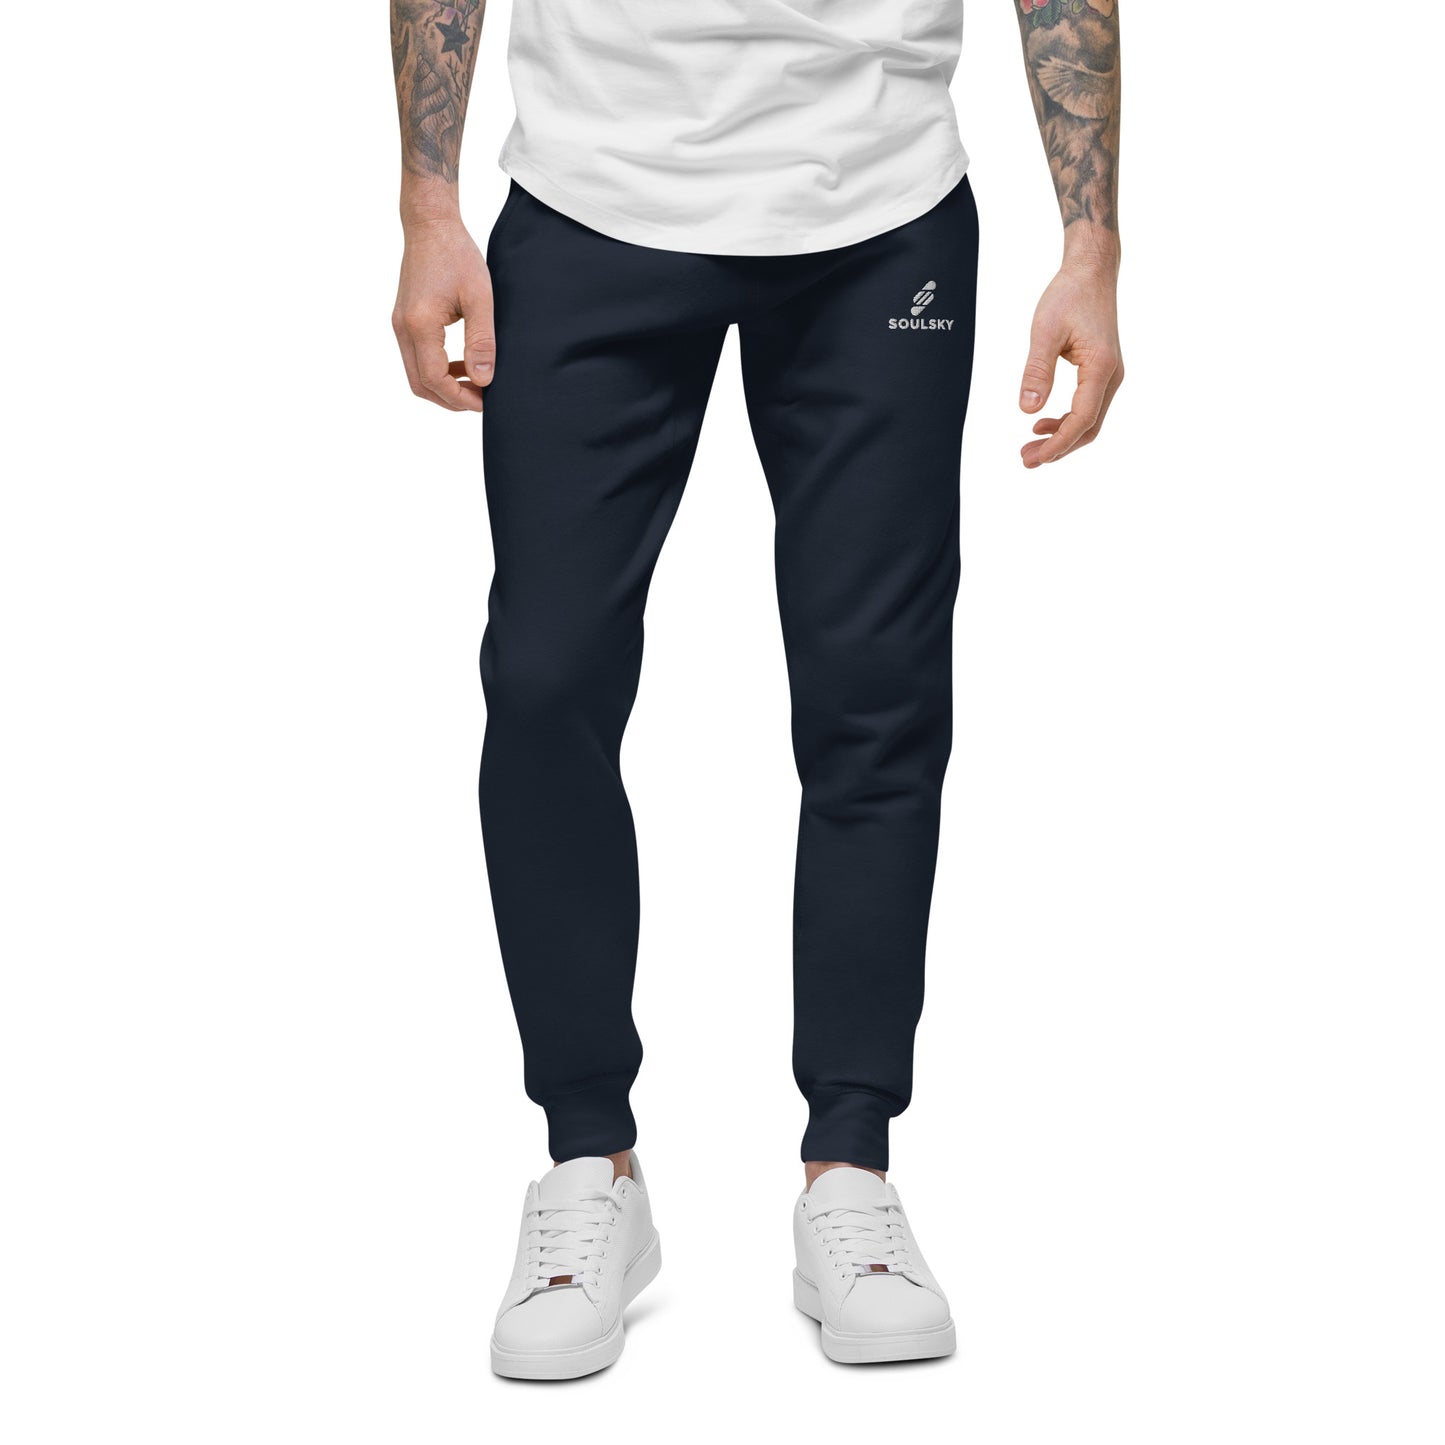 Male model wearing navy blue unisex joggers with white embroidered logo on left thigh that says "SOULSKY".